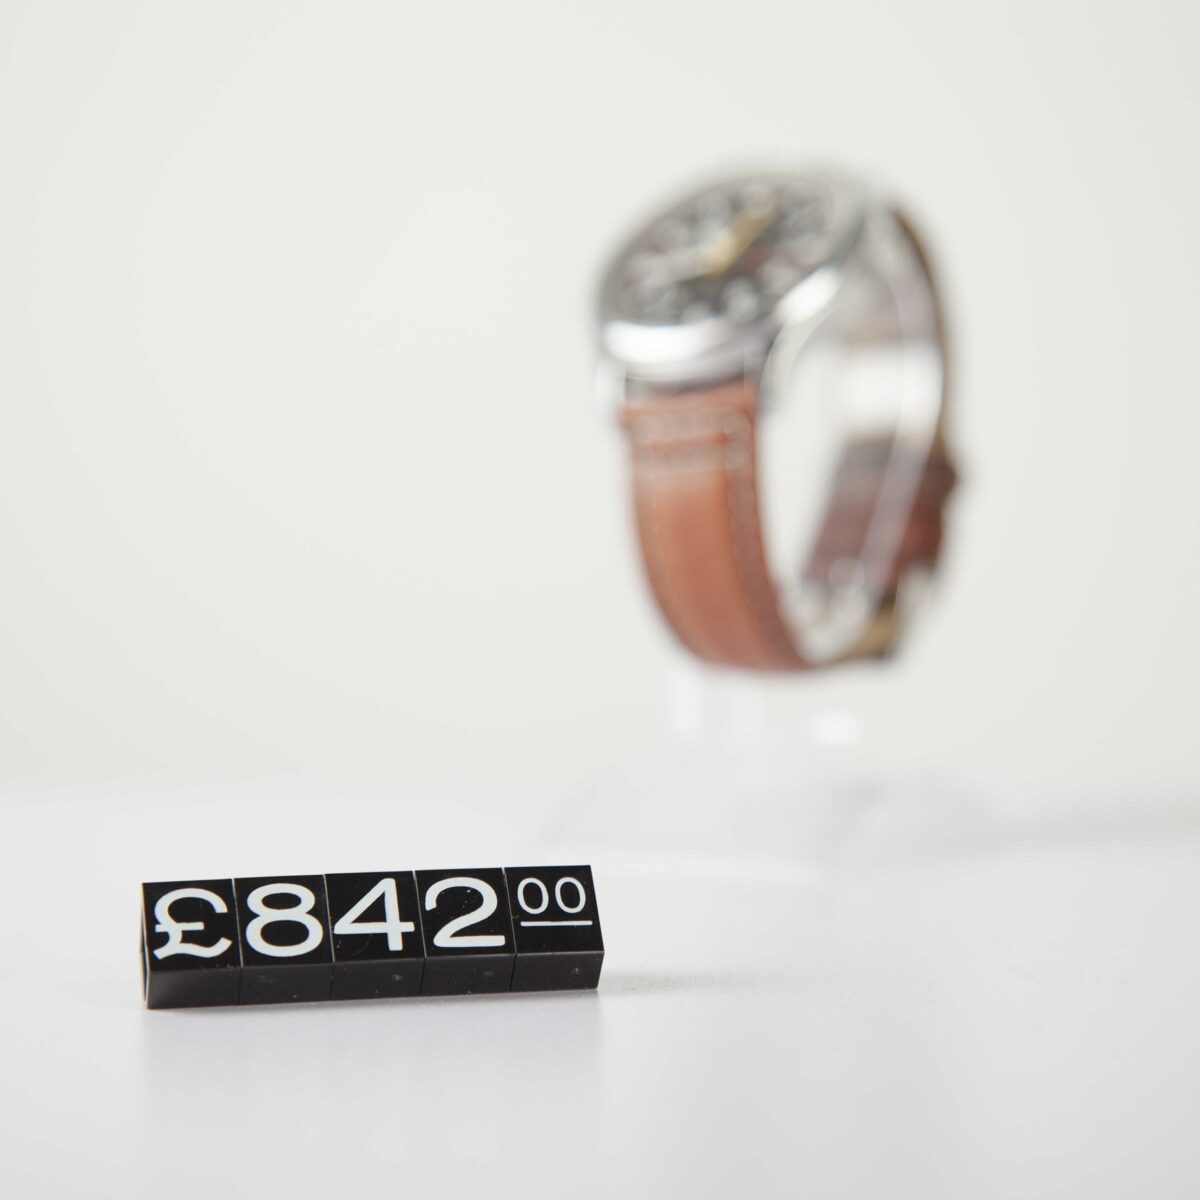 Retro black and white price tag cubes for retail displayed in front of a watch